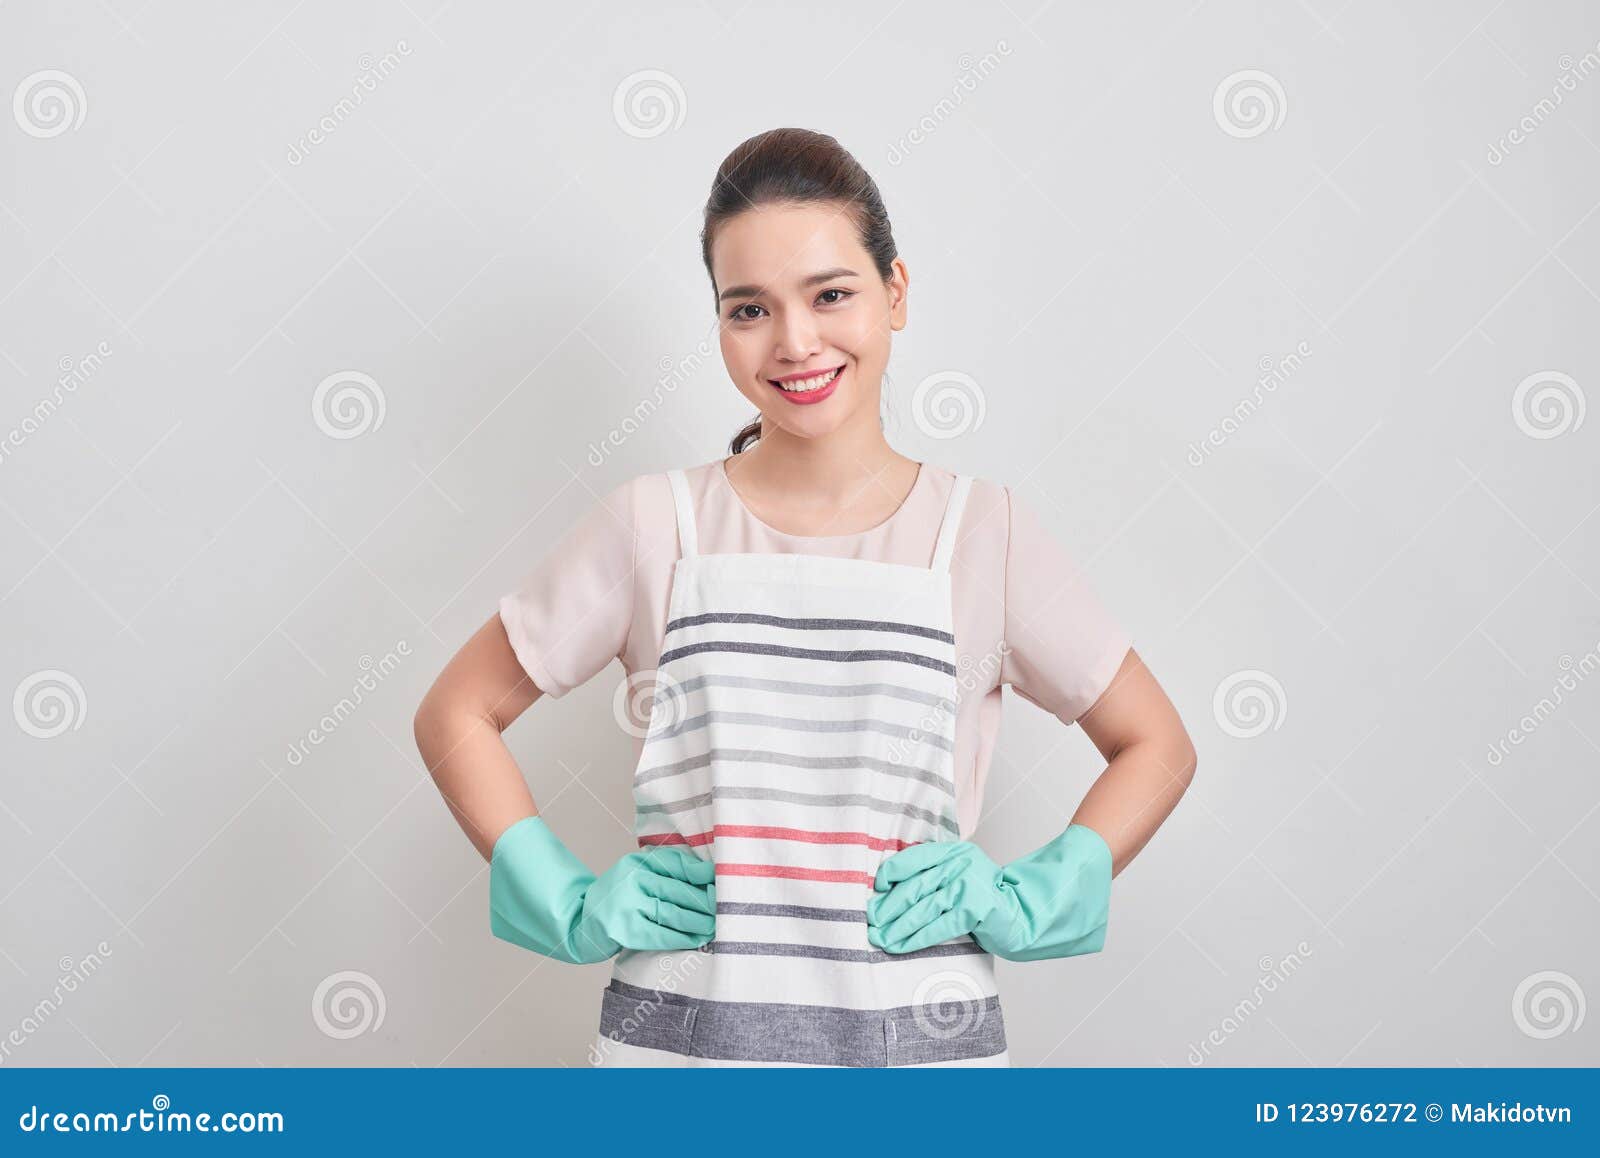 Young Attractive Smiling Housewife In Striped Apron, Blue Glove